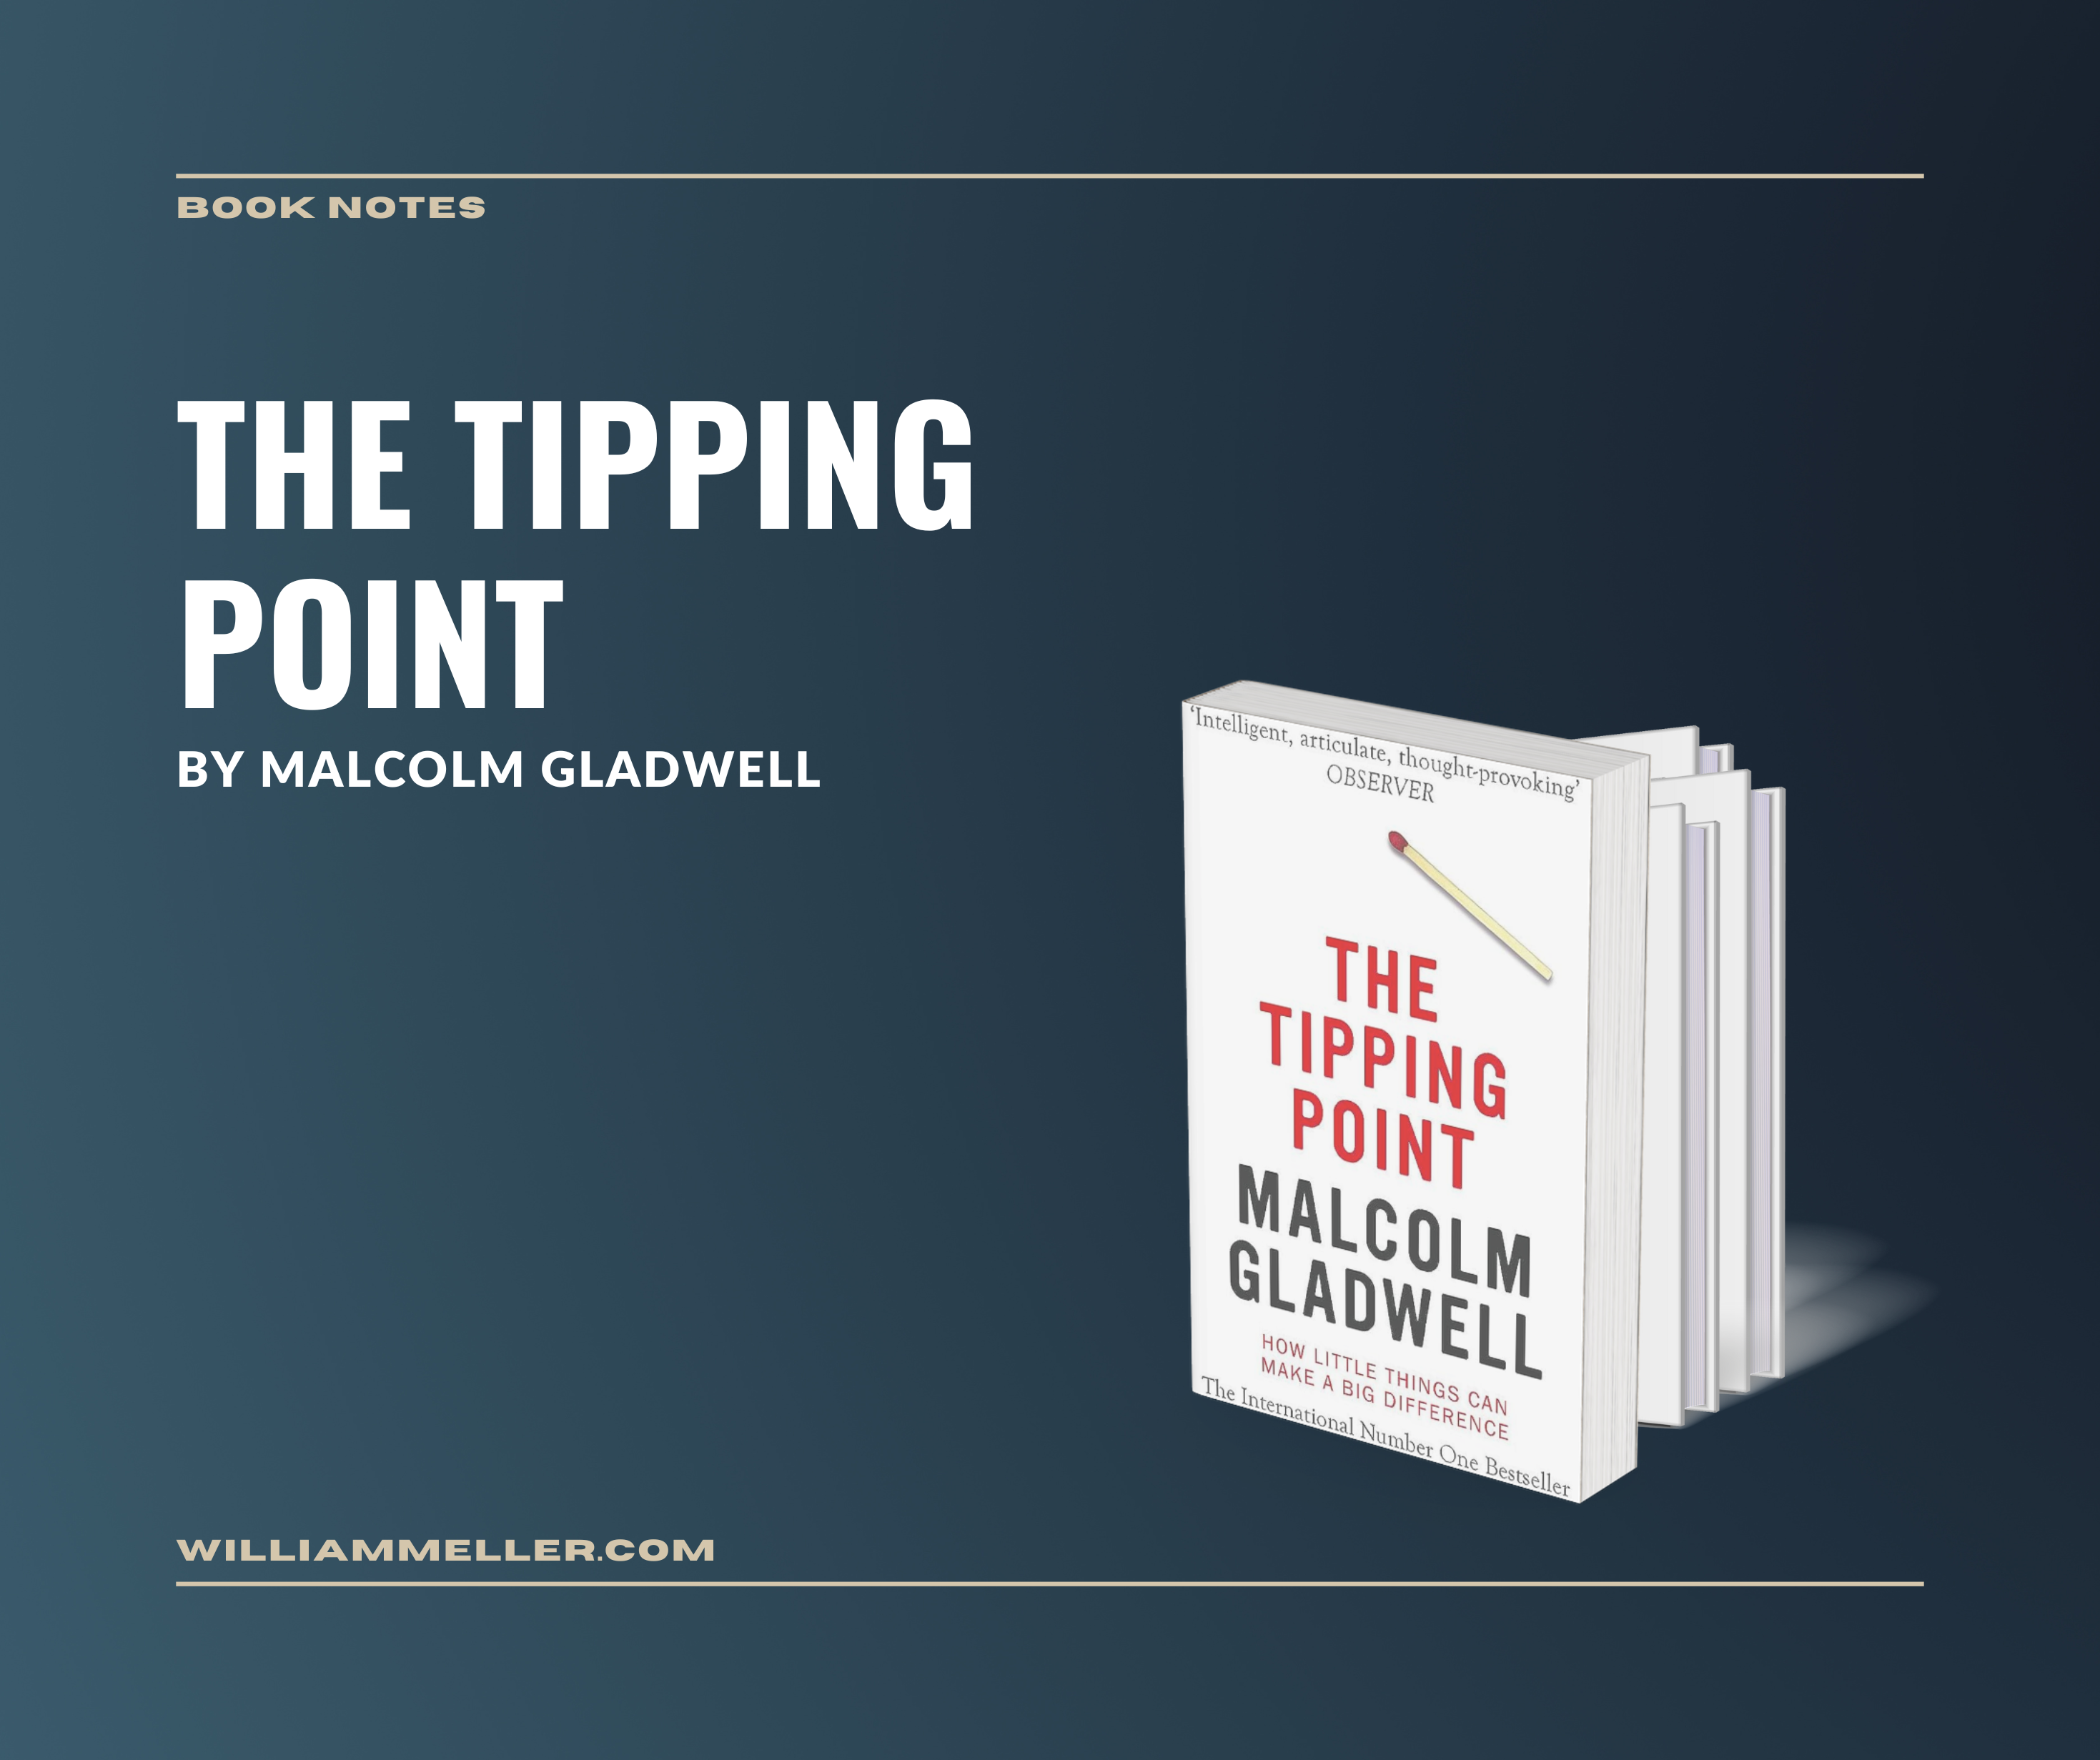 Book Notes #83: The Tipping Point by Malcolm Gladwell